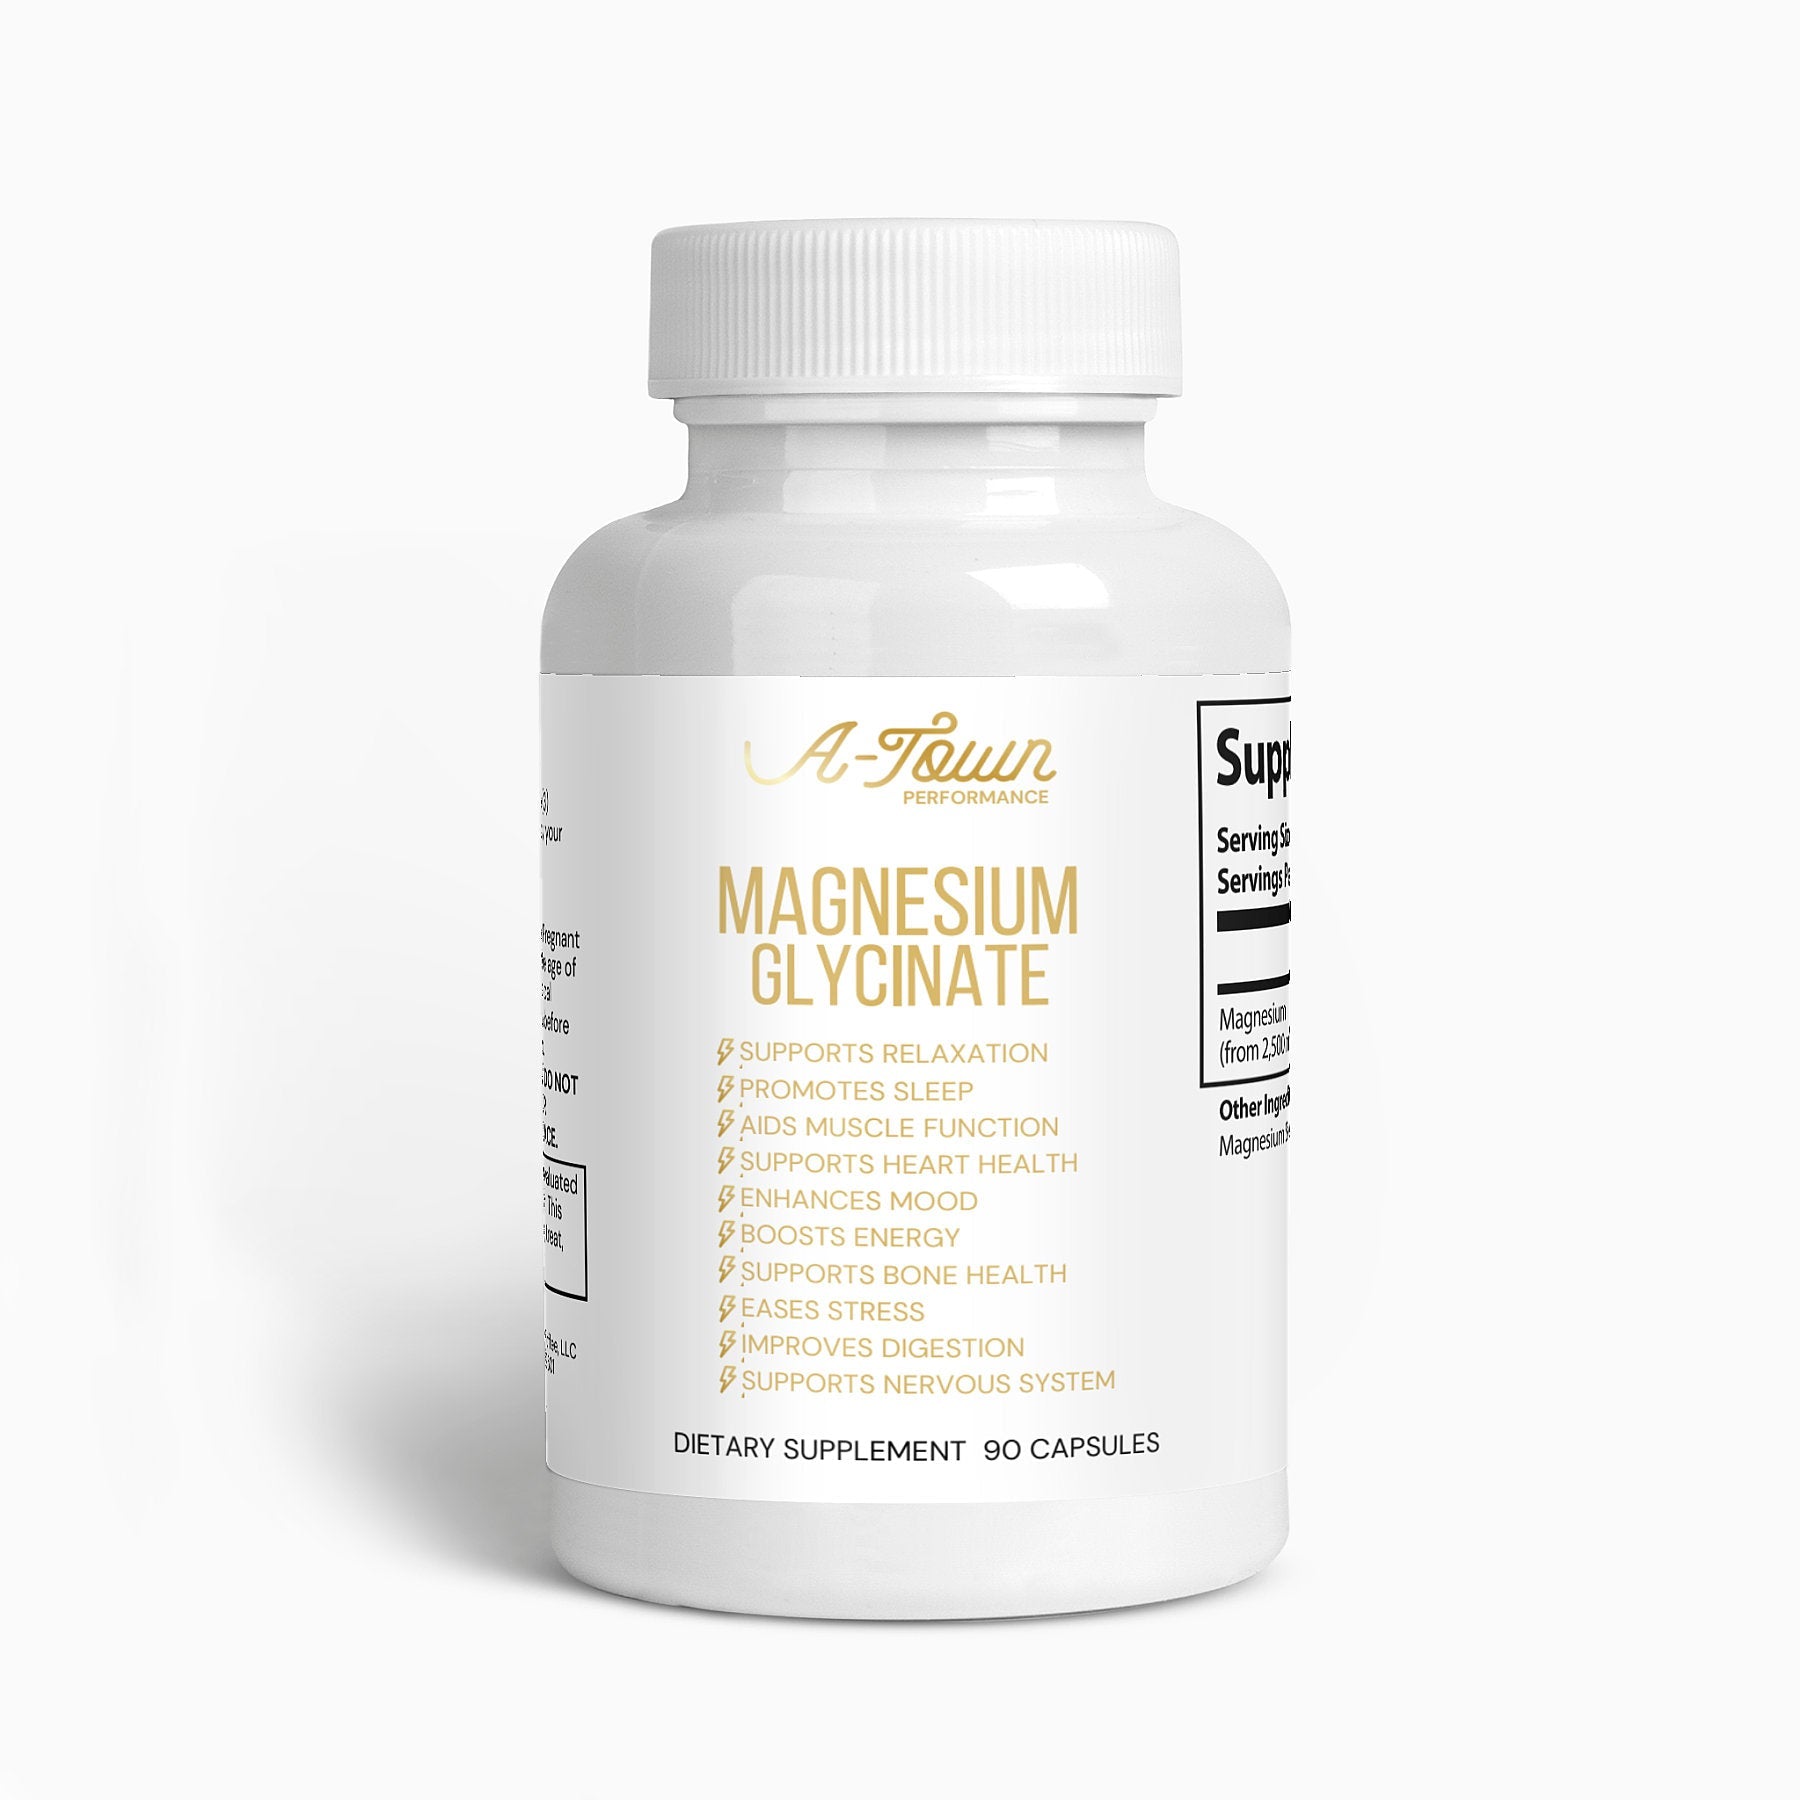 Magnesium Glycinate - A-Town Performance Vitamins & Minerals